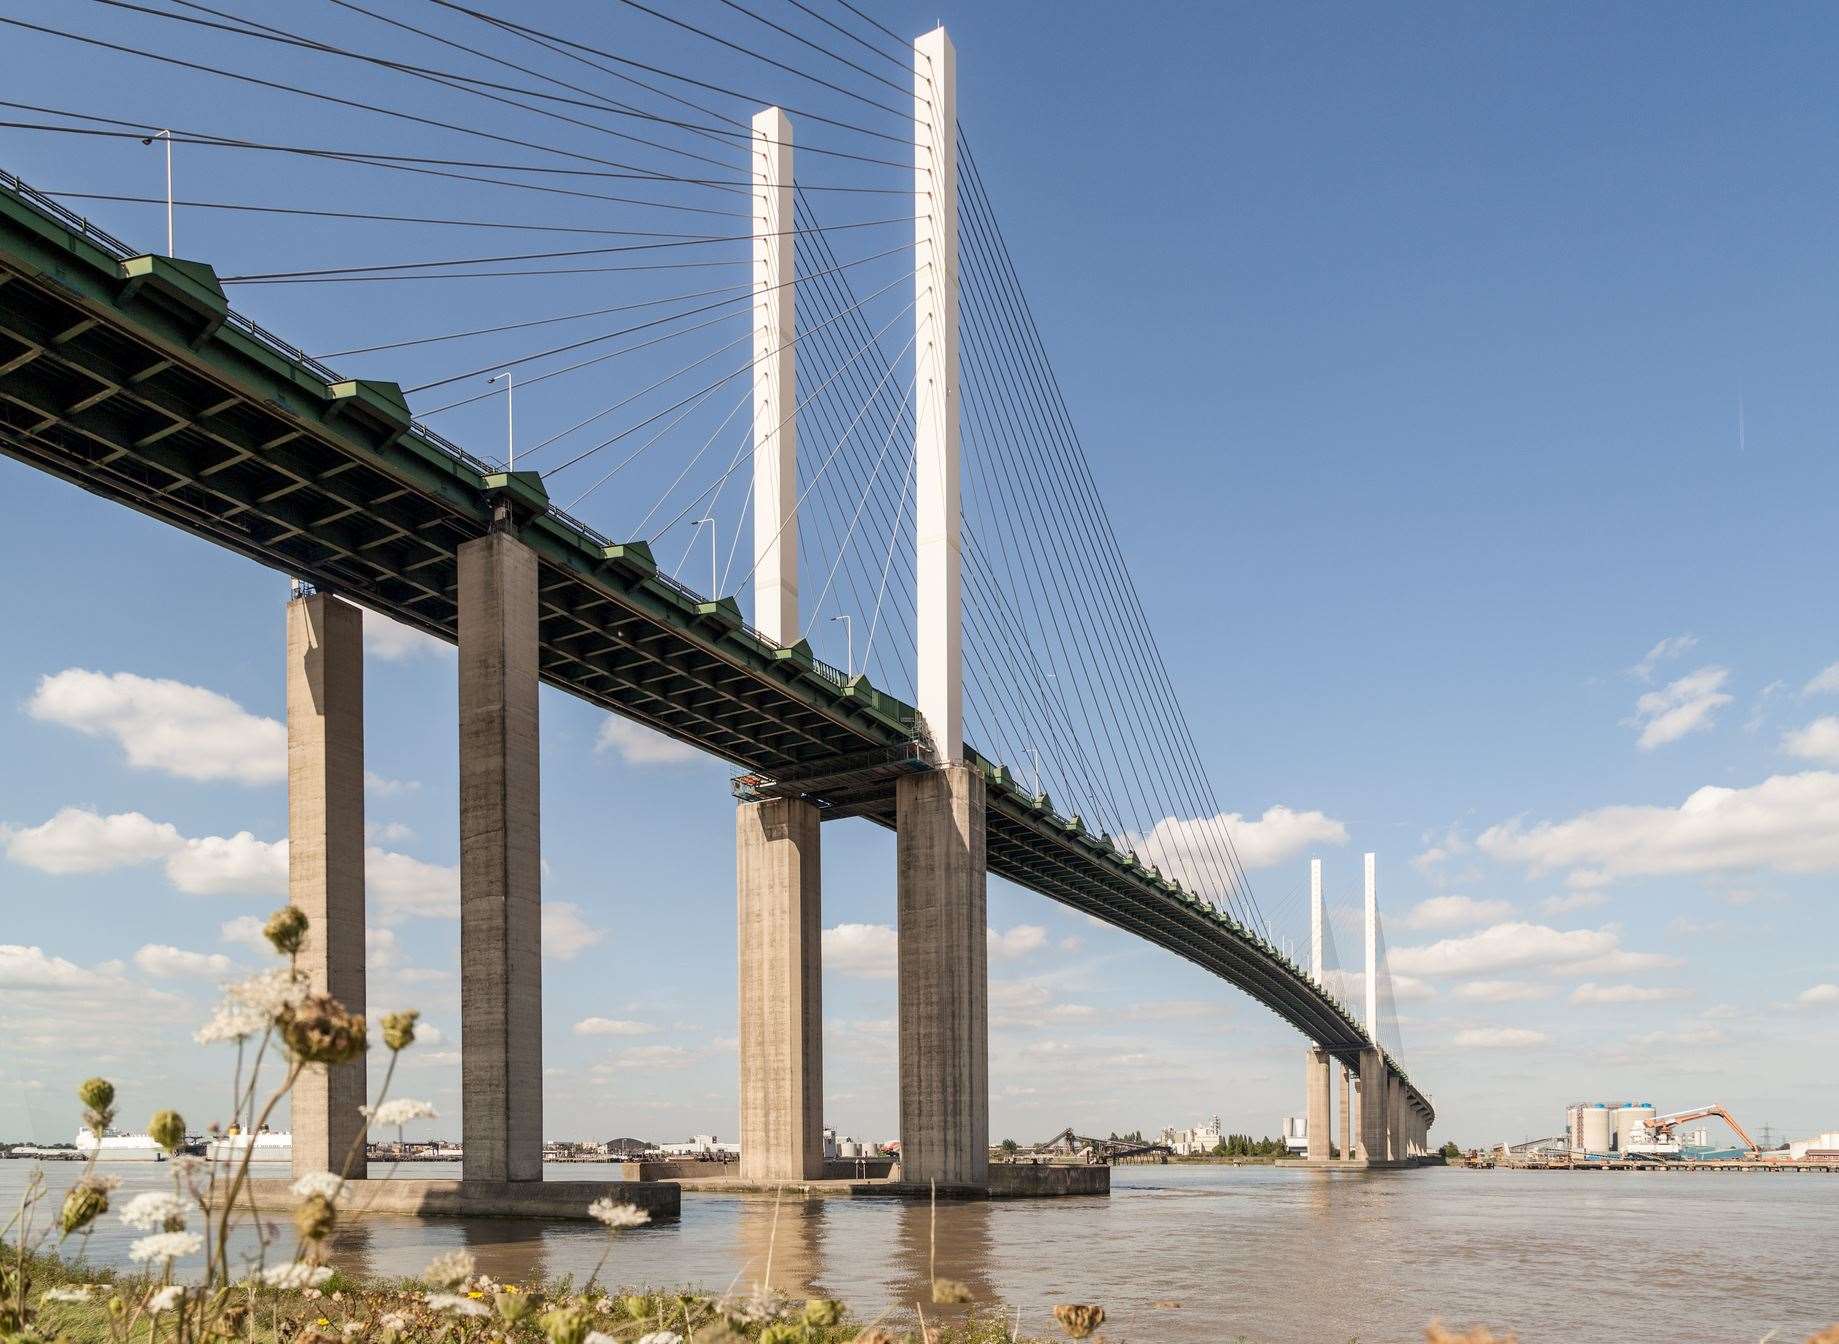 Emergency services remain at the scene of the incident on the Dartford Crossing